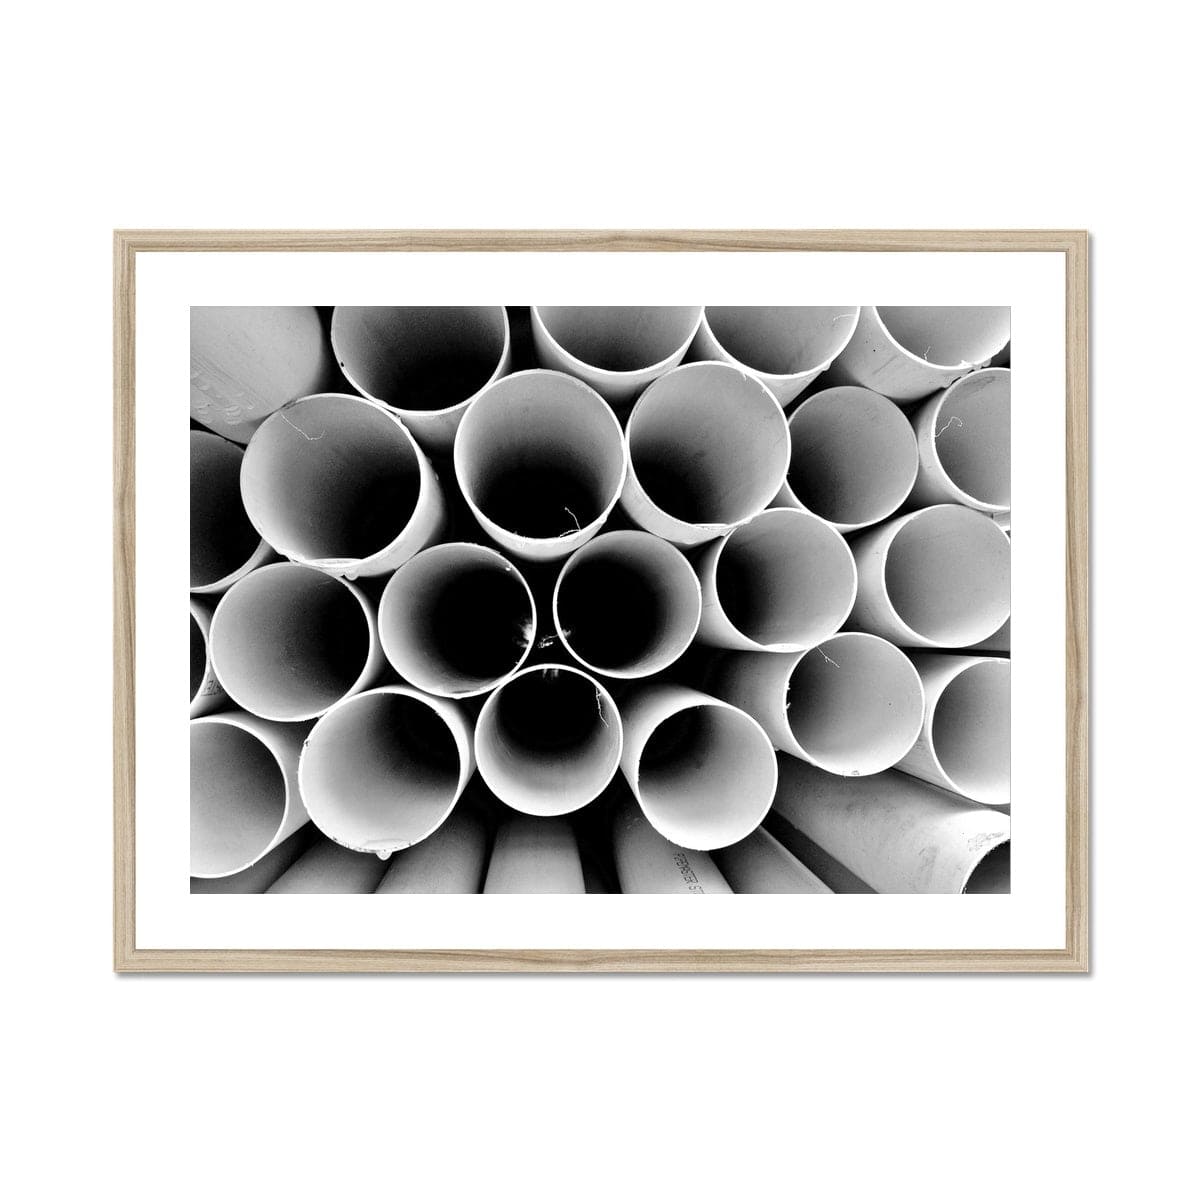 Seek & Ramble Framed A4 Landscape (29x21cm) / Natural Frame Monochrome Round Pipes Abstract Framed & Mounted Print